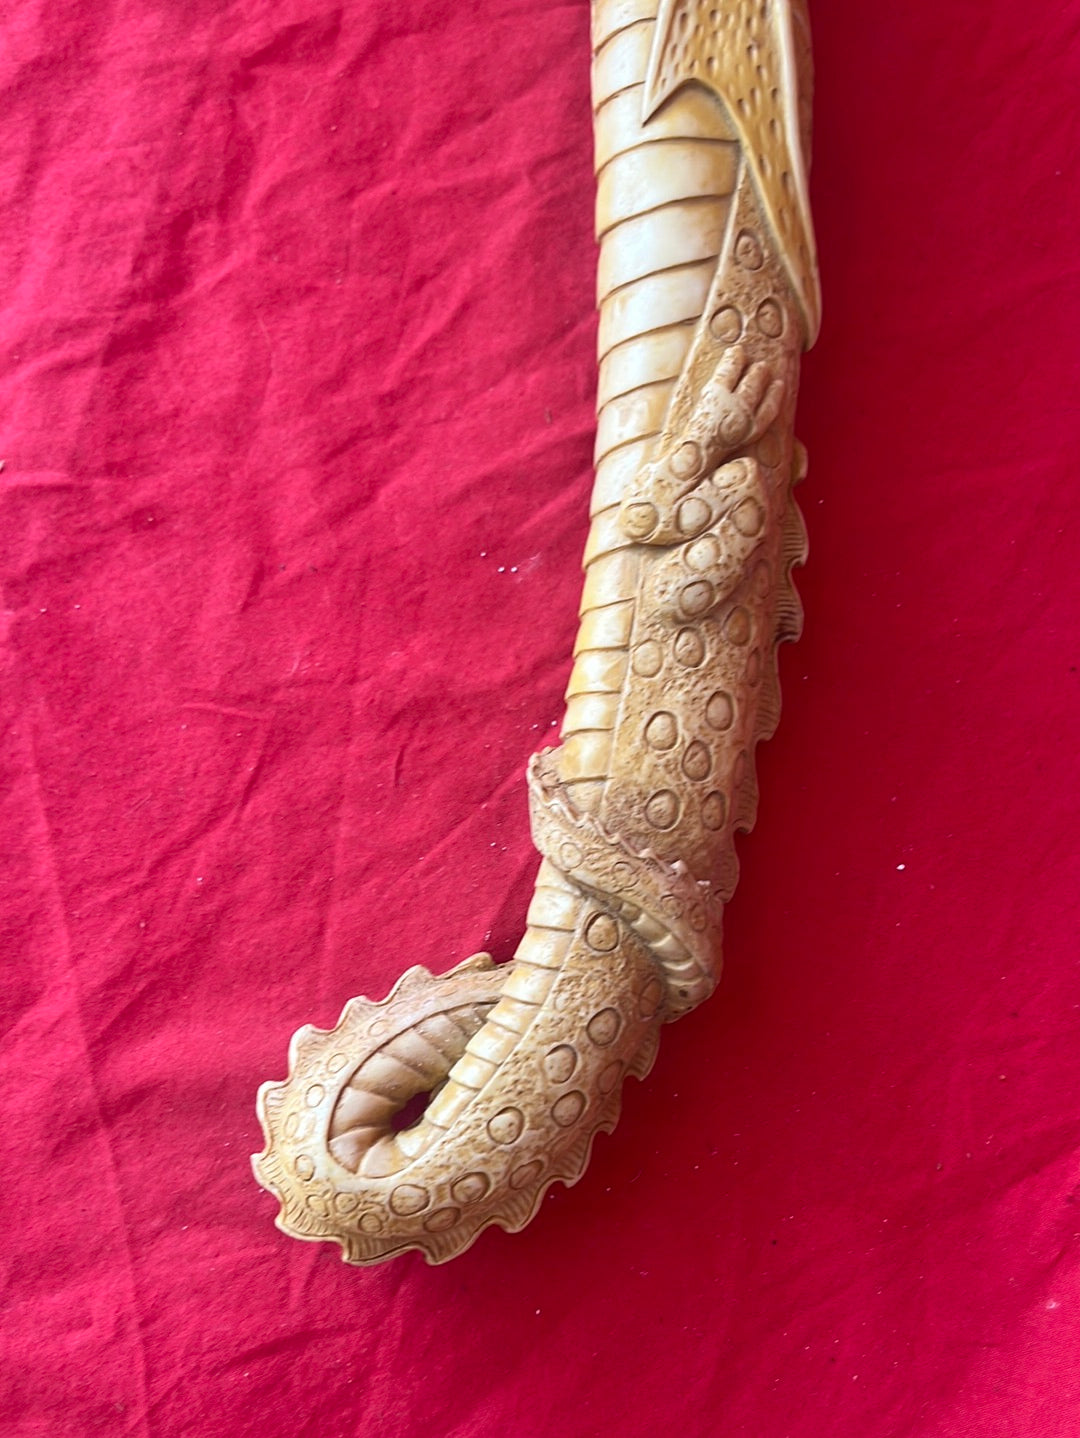 Dragon Dagger with Carved Resin Handle and Sheath